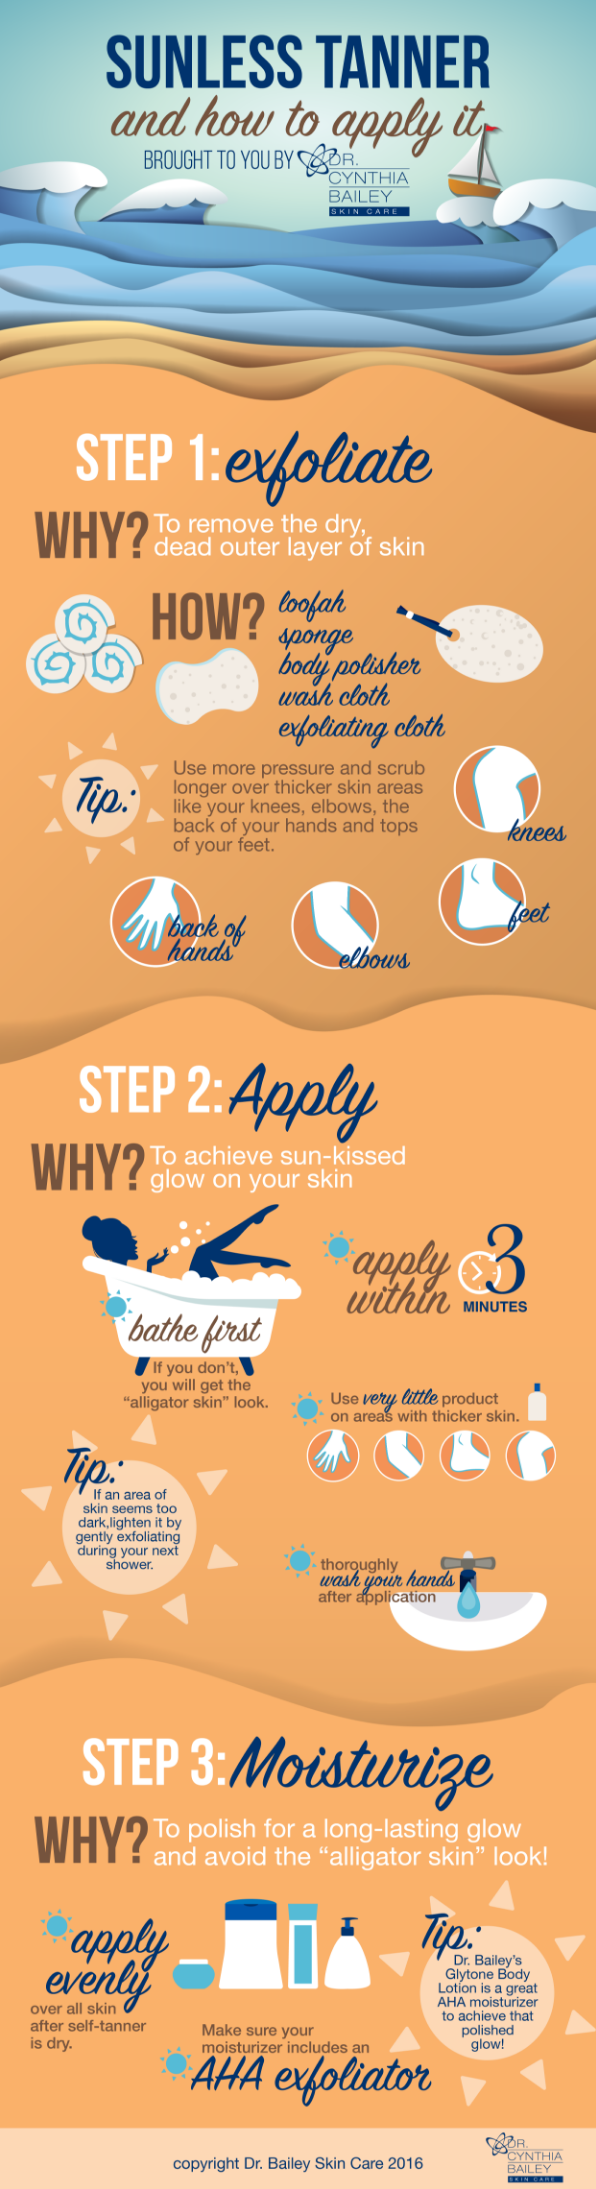 Sunless Tanner and How to Apply It Infographic